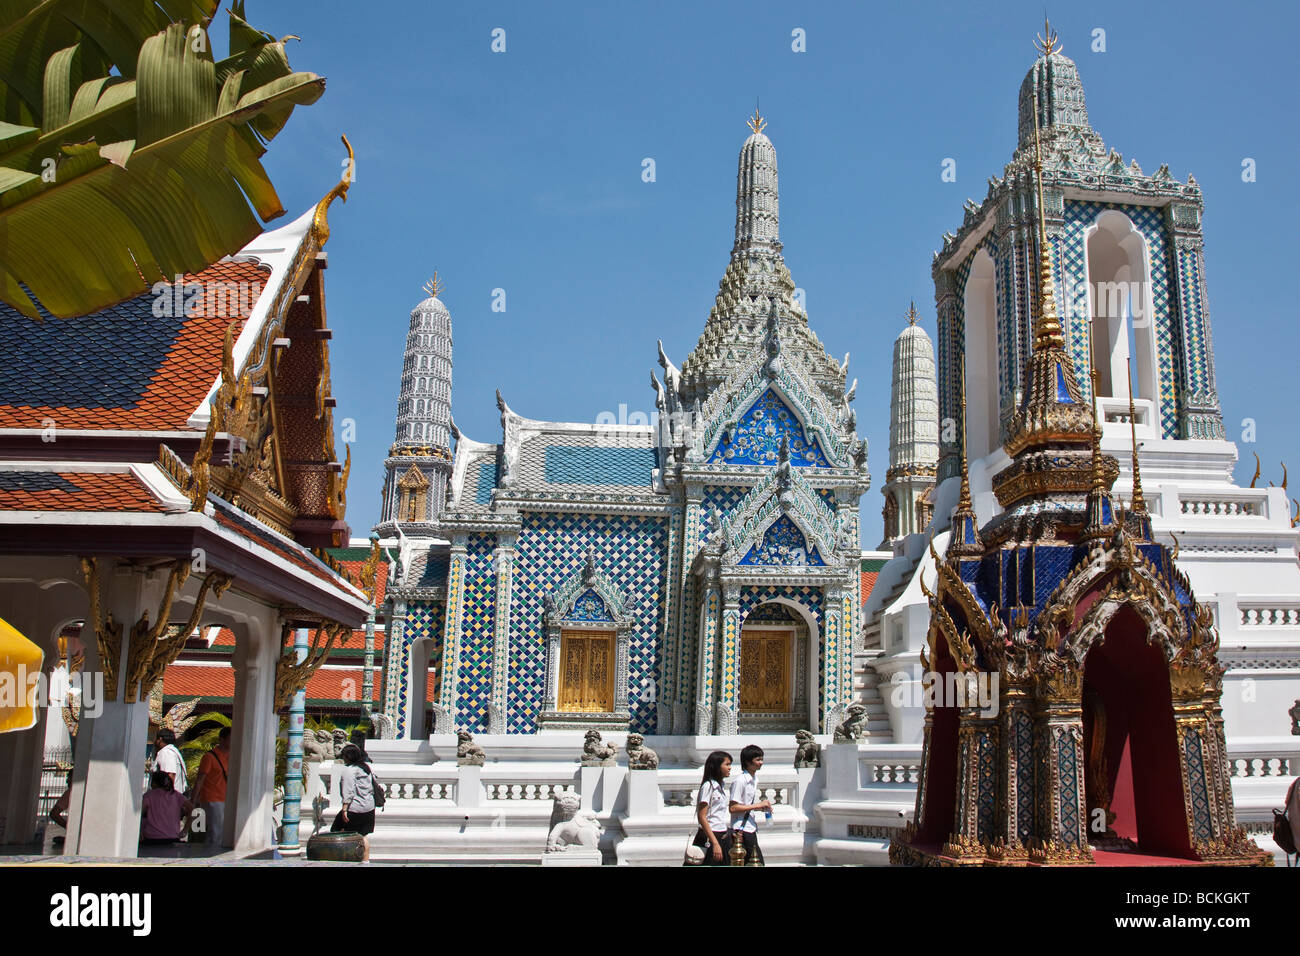 Thailand, Bangkok. Some of the beautiful Buddhist temples and shrines in the King of Thailand s Royal Grand Palace. Stock Photo